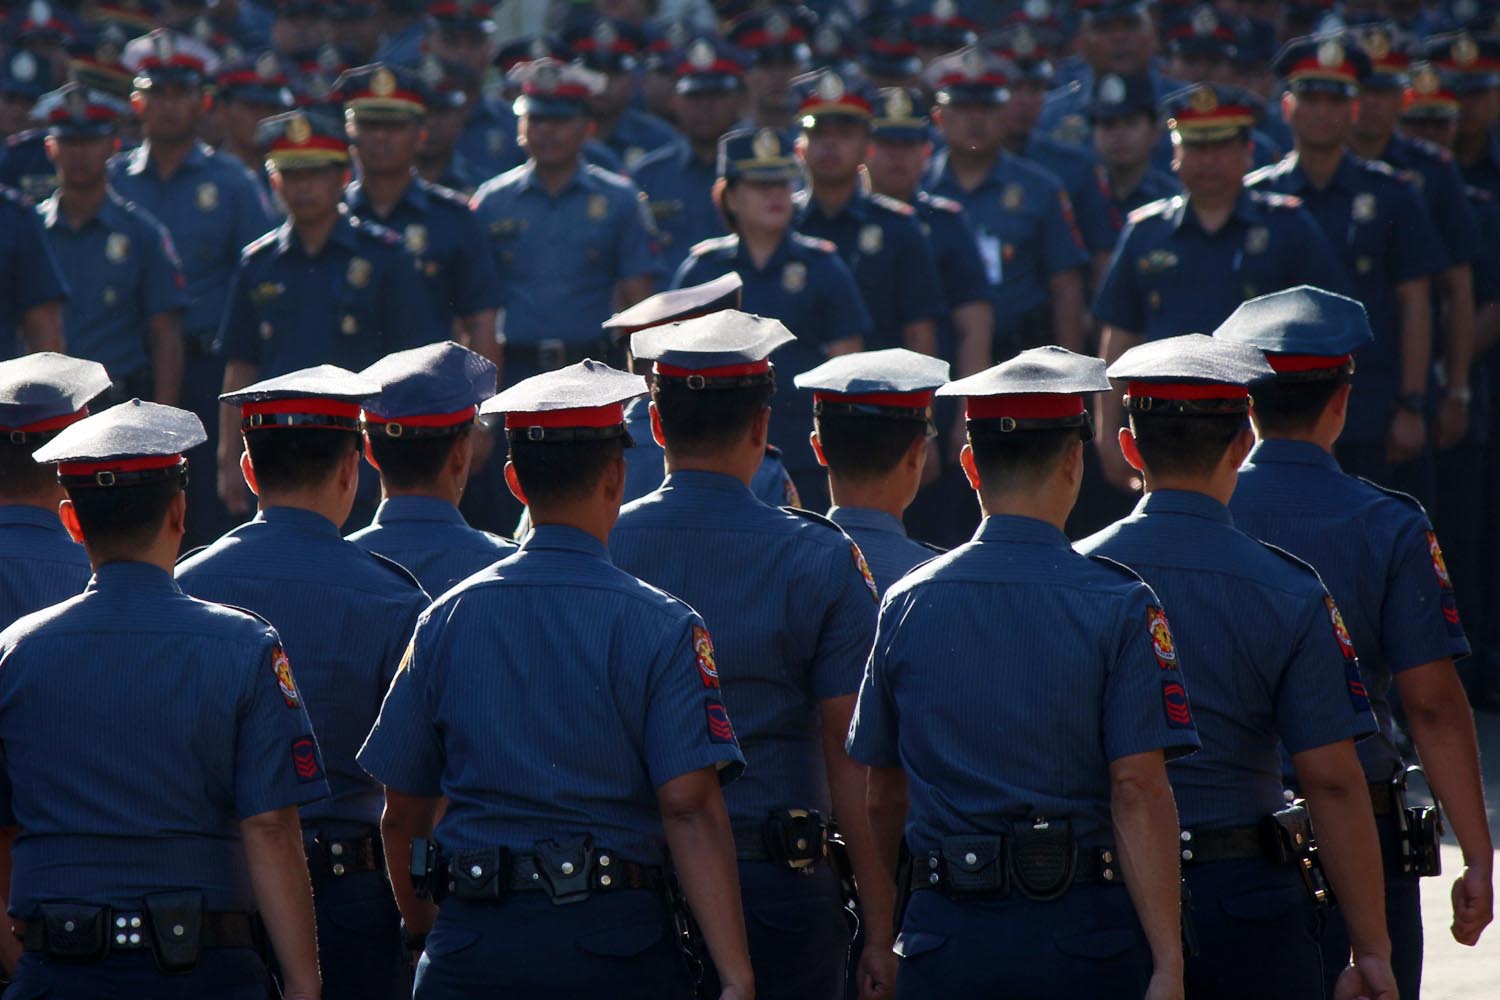 DILIGENCE. The Philippine National Police should carry out arrests with utmost diligence, says the Commission on Human Rights. File photo by Darren Langit/Rappler  